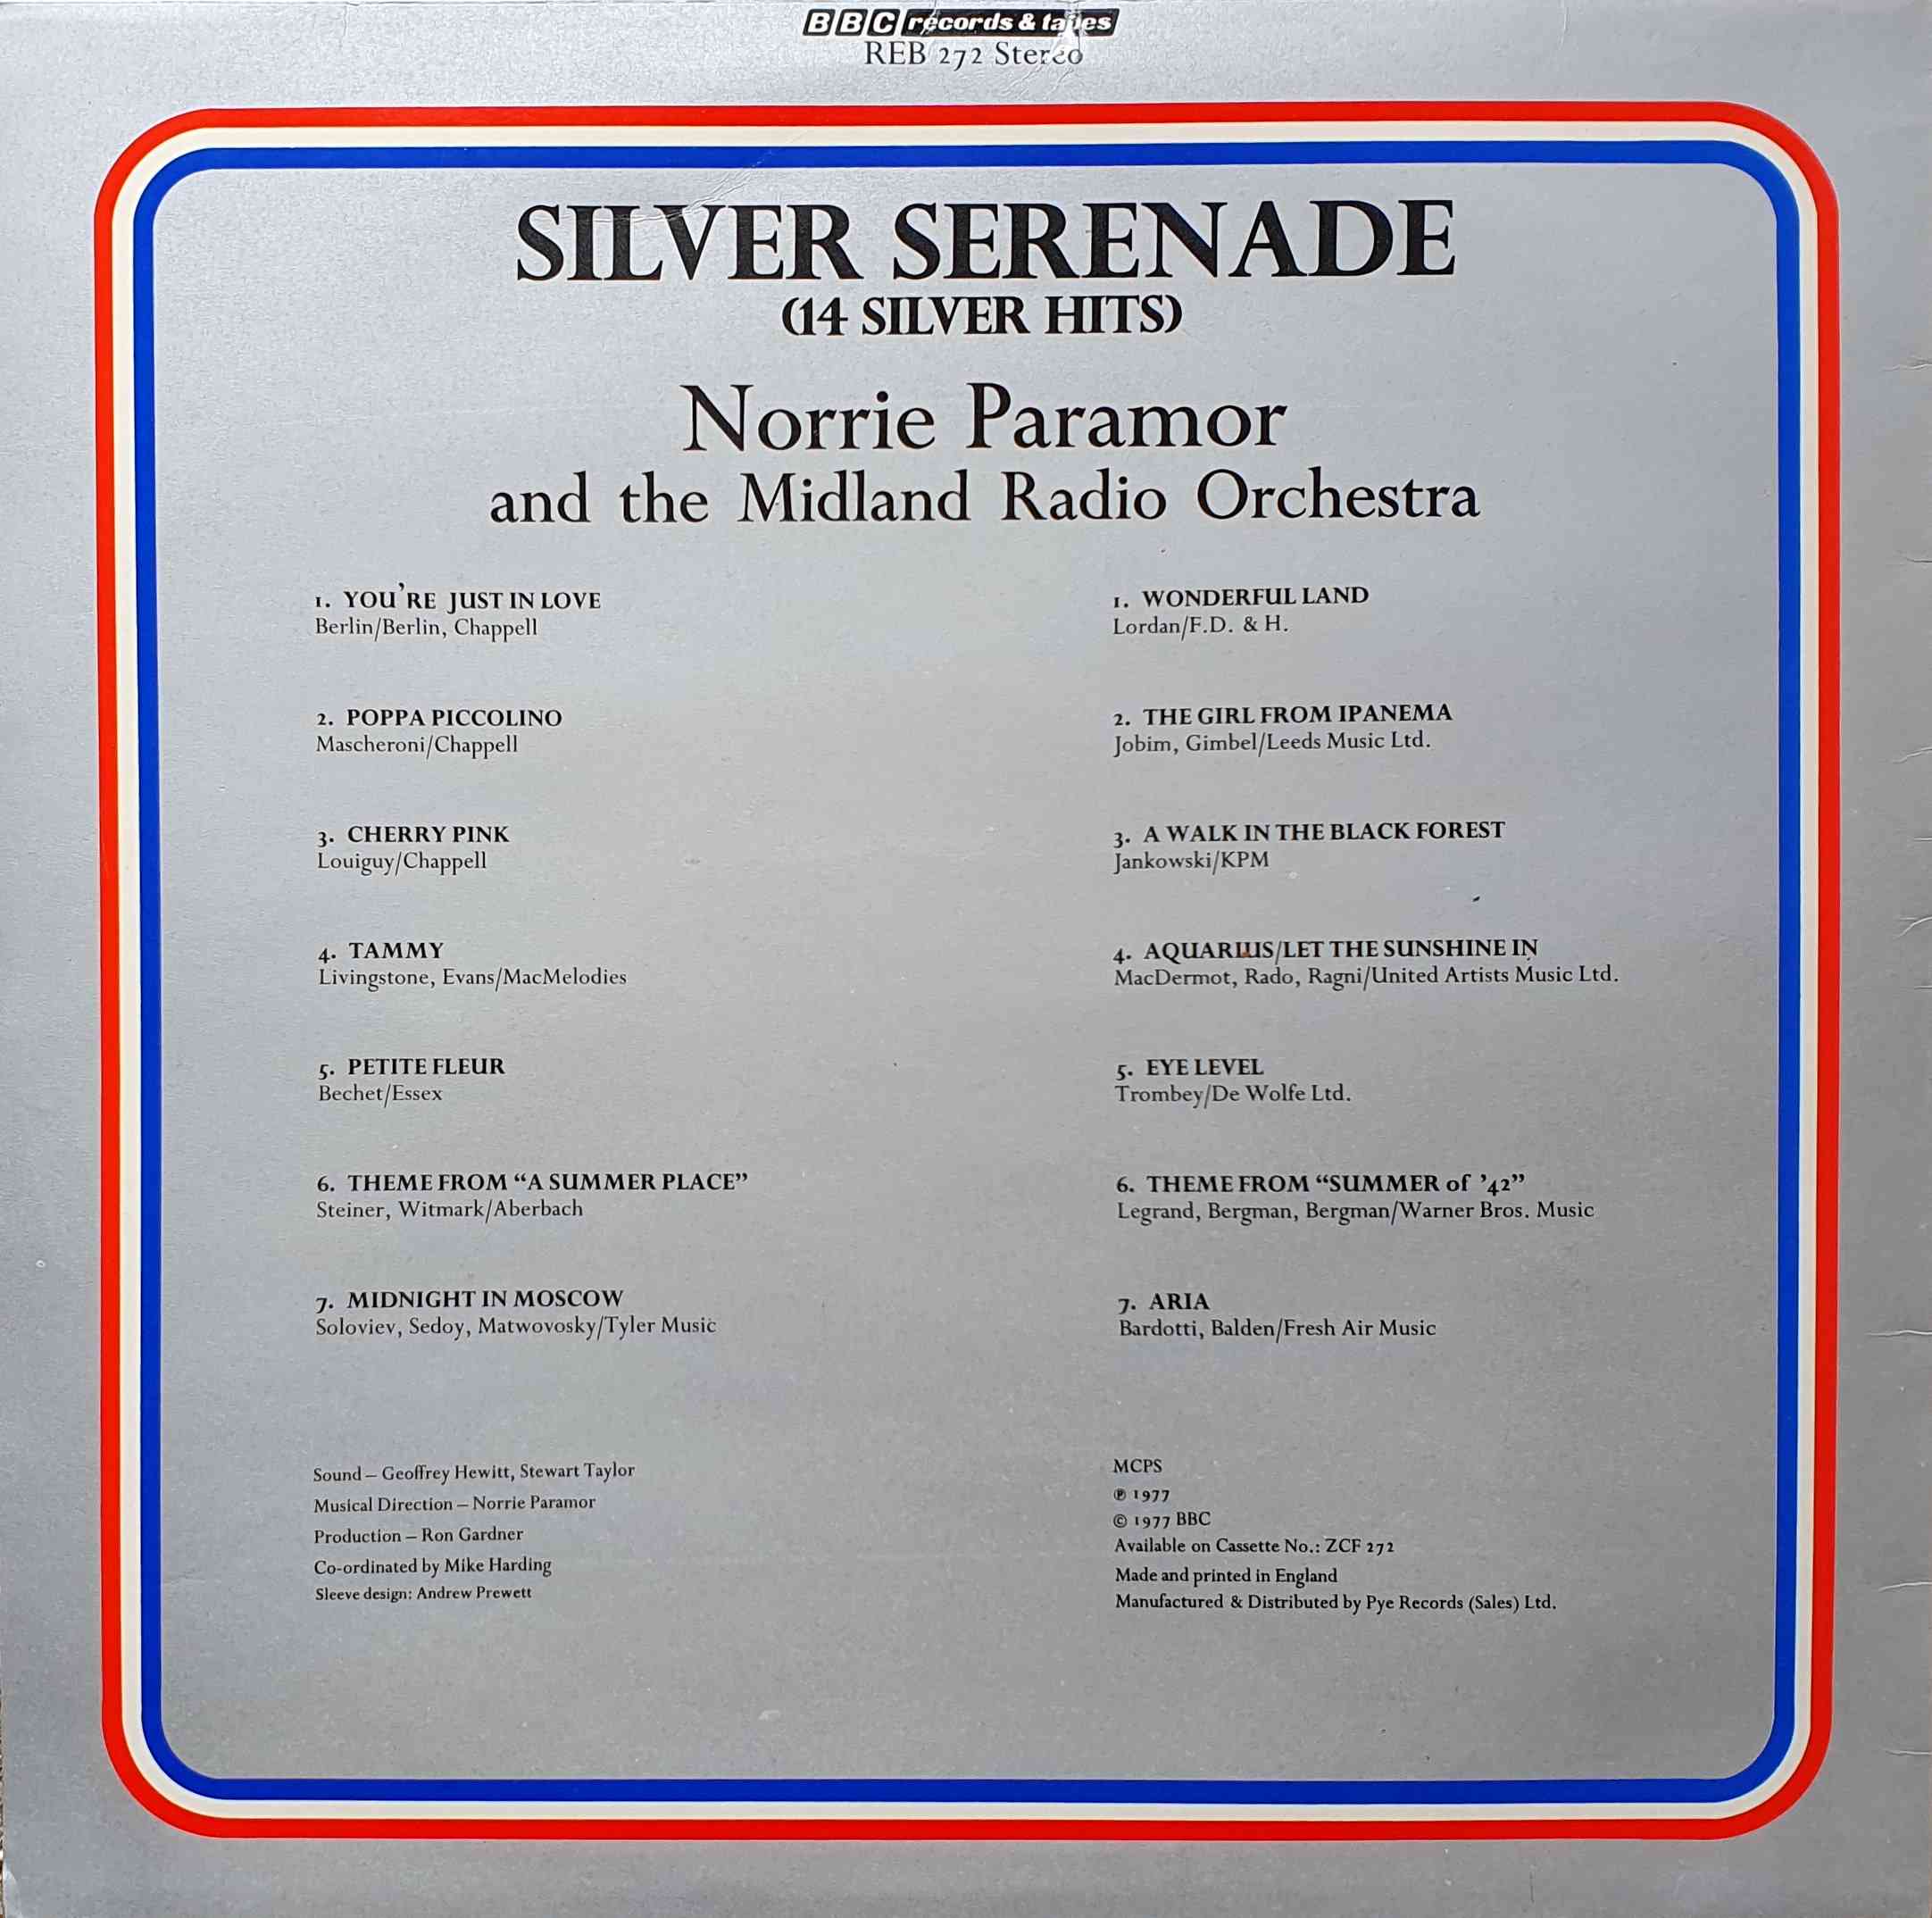 Picture of REB 272 The silver jubilee - Silver serenade by artist Norrie Paramor from the BBC records and Tapes library